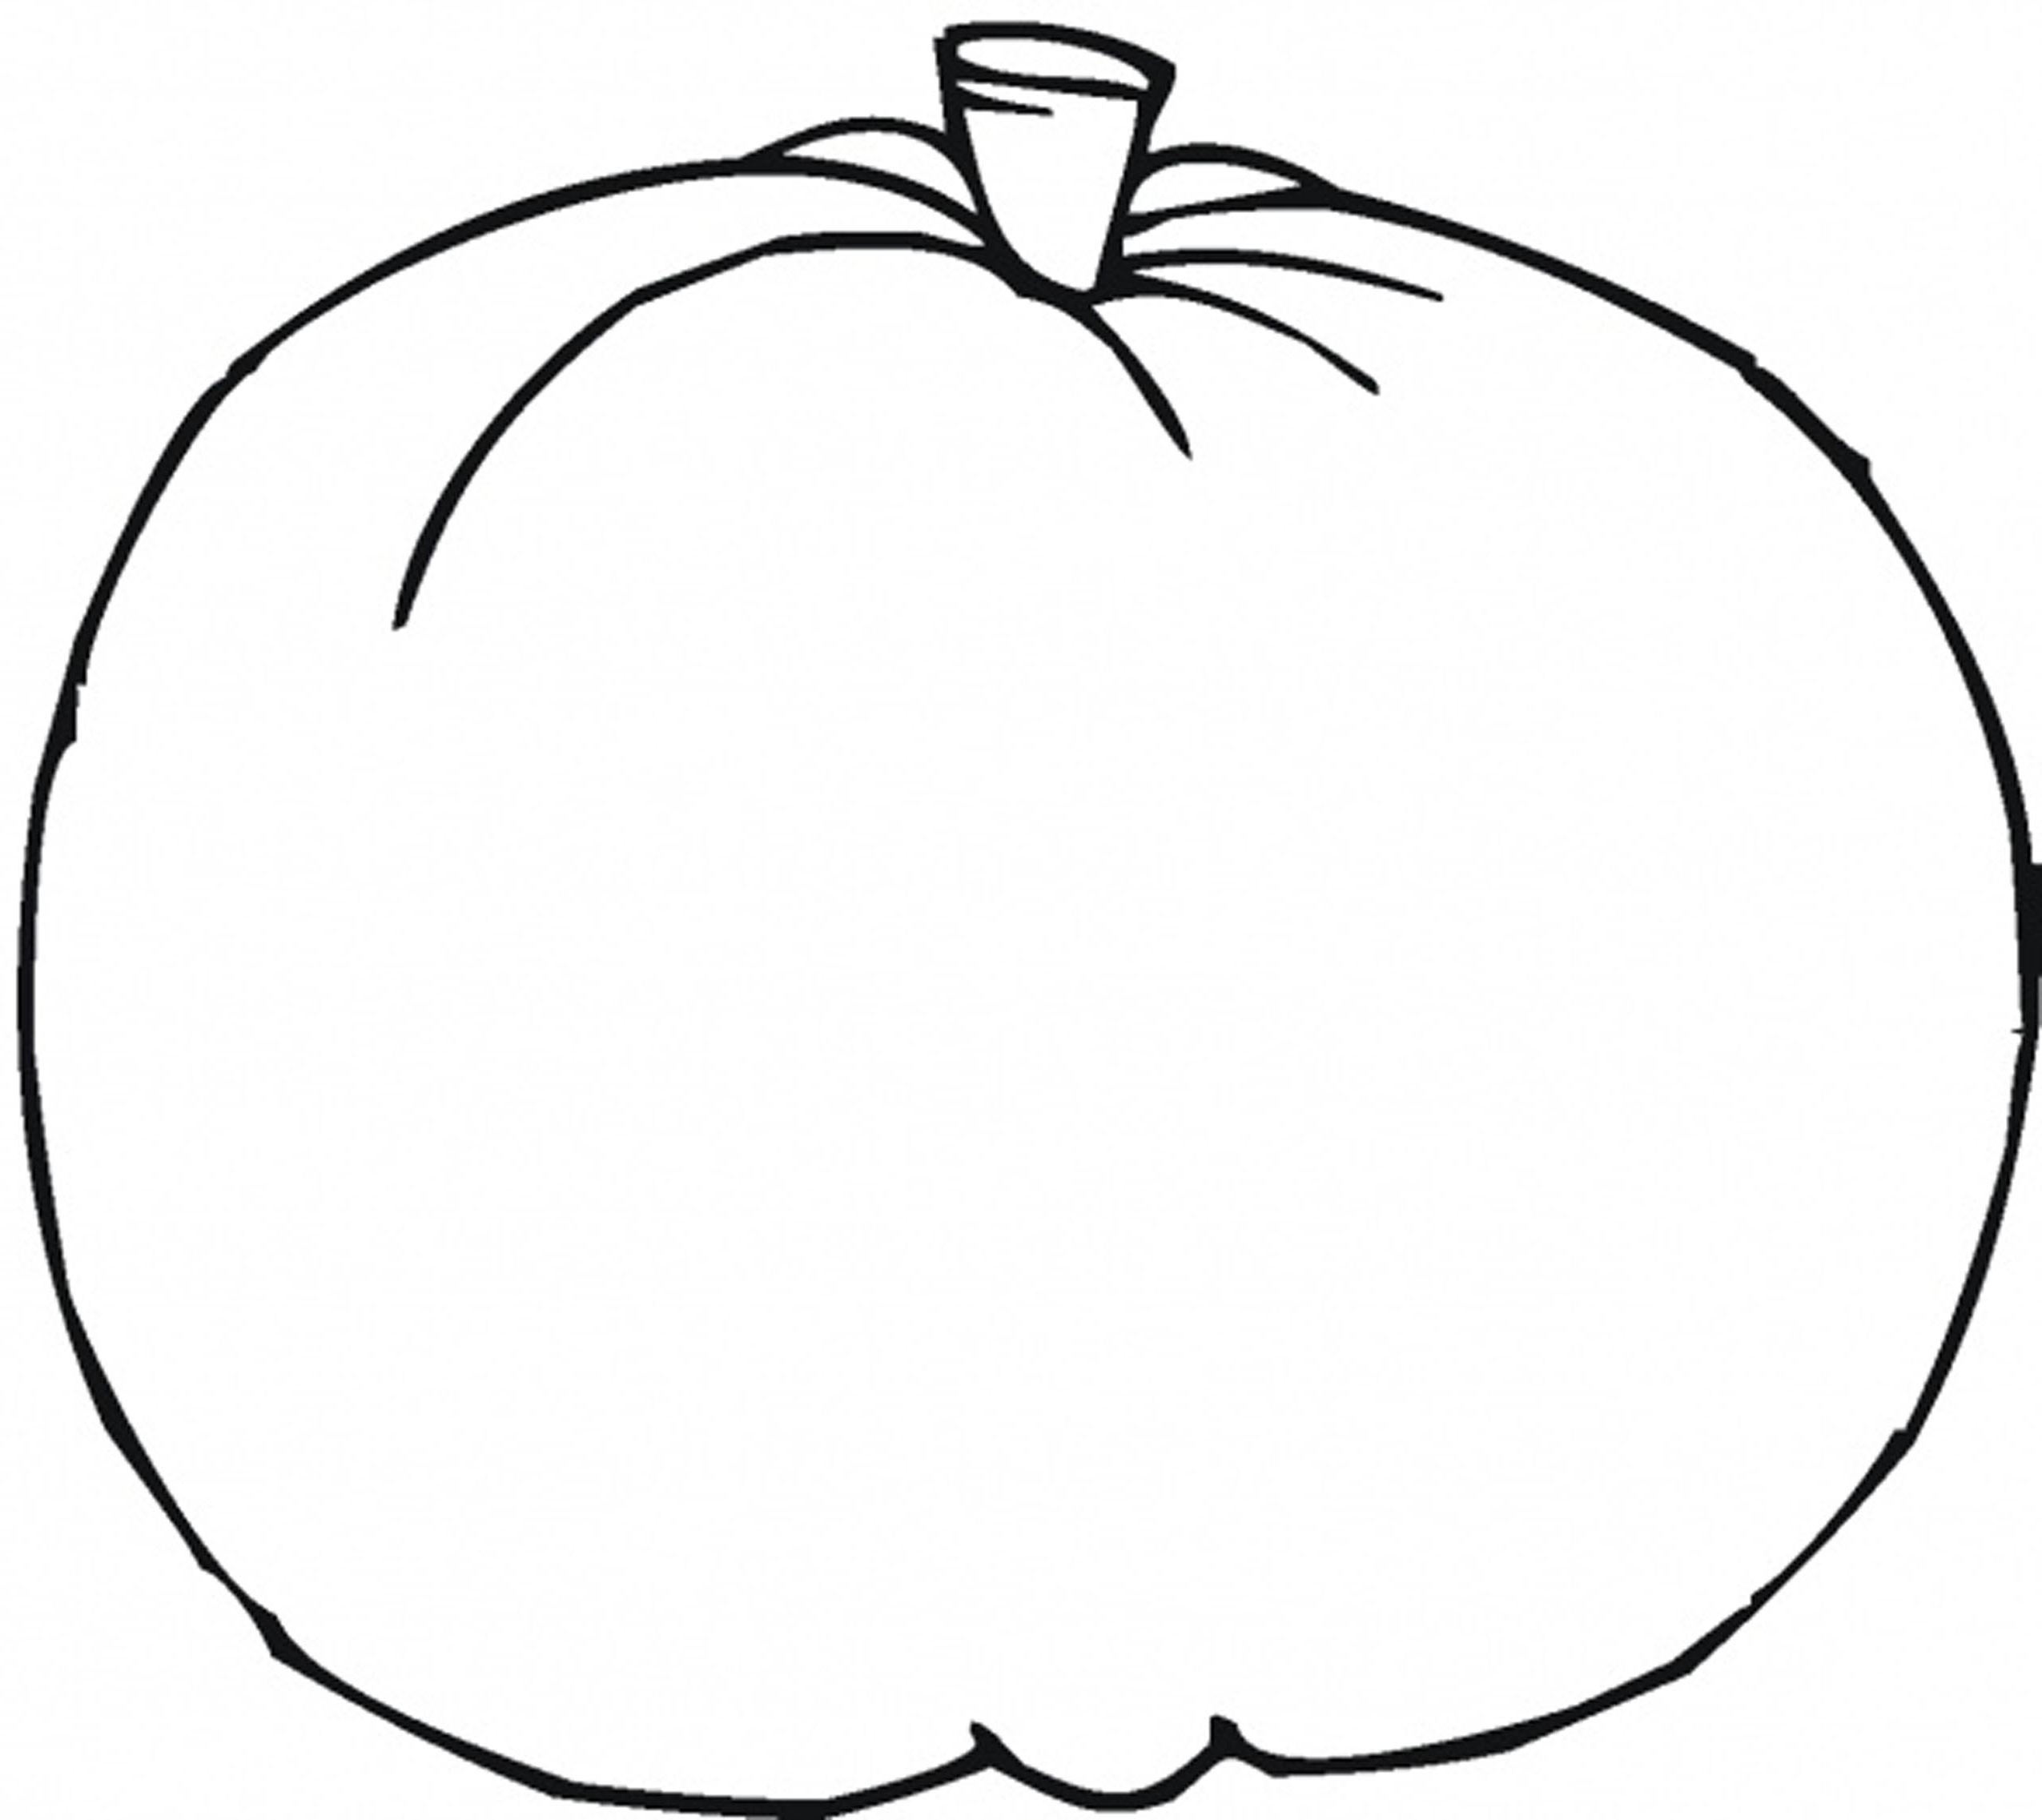 coloring-page-pumpkin-166834-objects-printable-coloring-pages